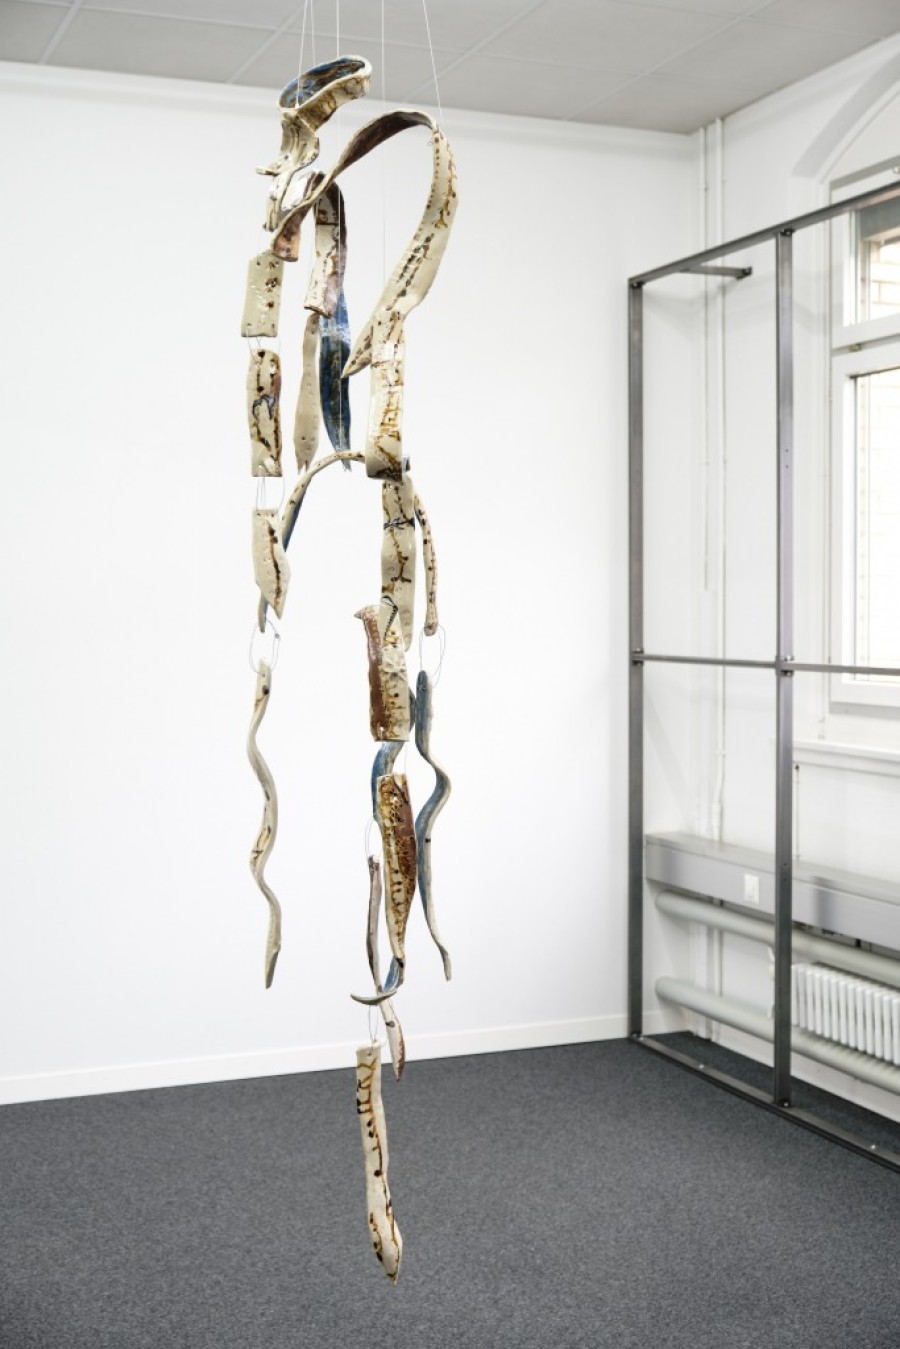 Camille Dumond, BGY 4, glazed stoneware suspension with willow and cedar ashes, steel, ca. 180 x 60 x 60 cm, 2021. Photo by Philip Ullrich. Courtesy of unanimous consent and the artist